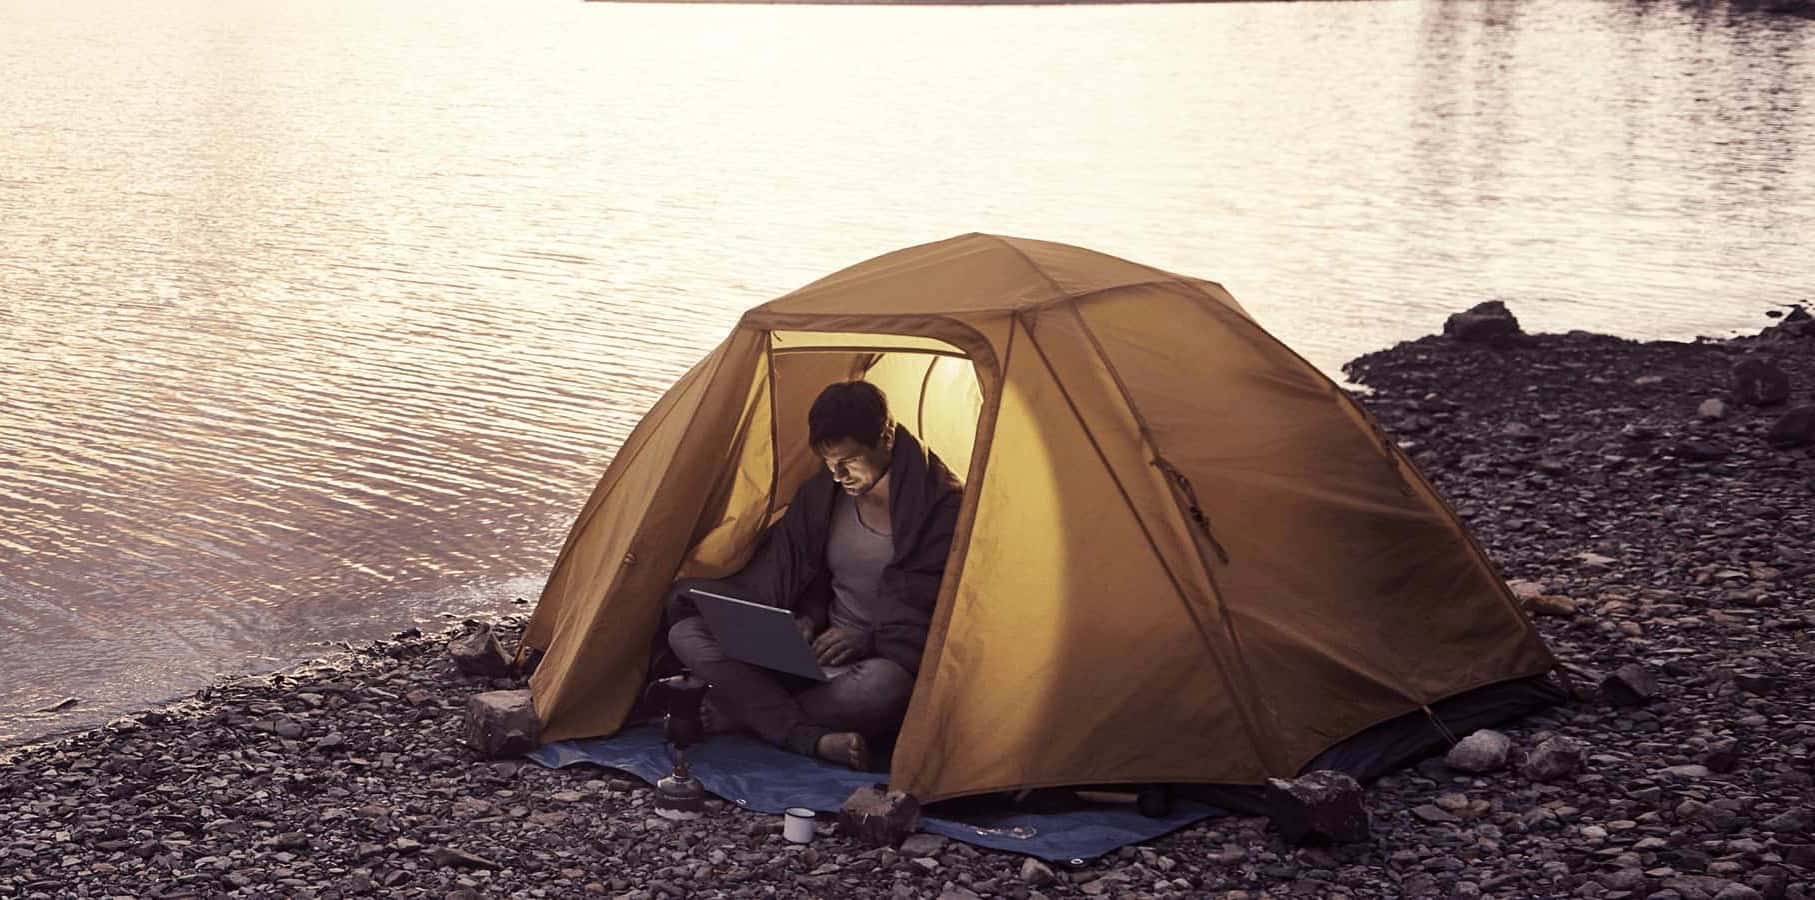 A person working on a laptop inside a yellow tent by a serene lake during sunset